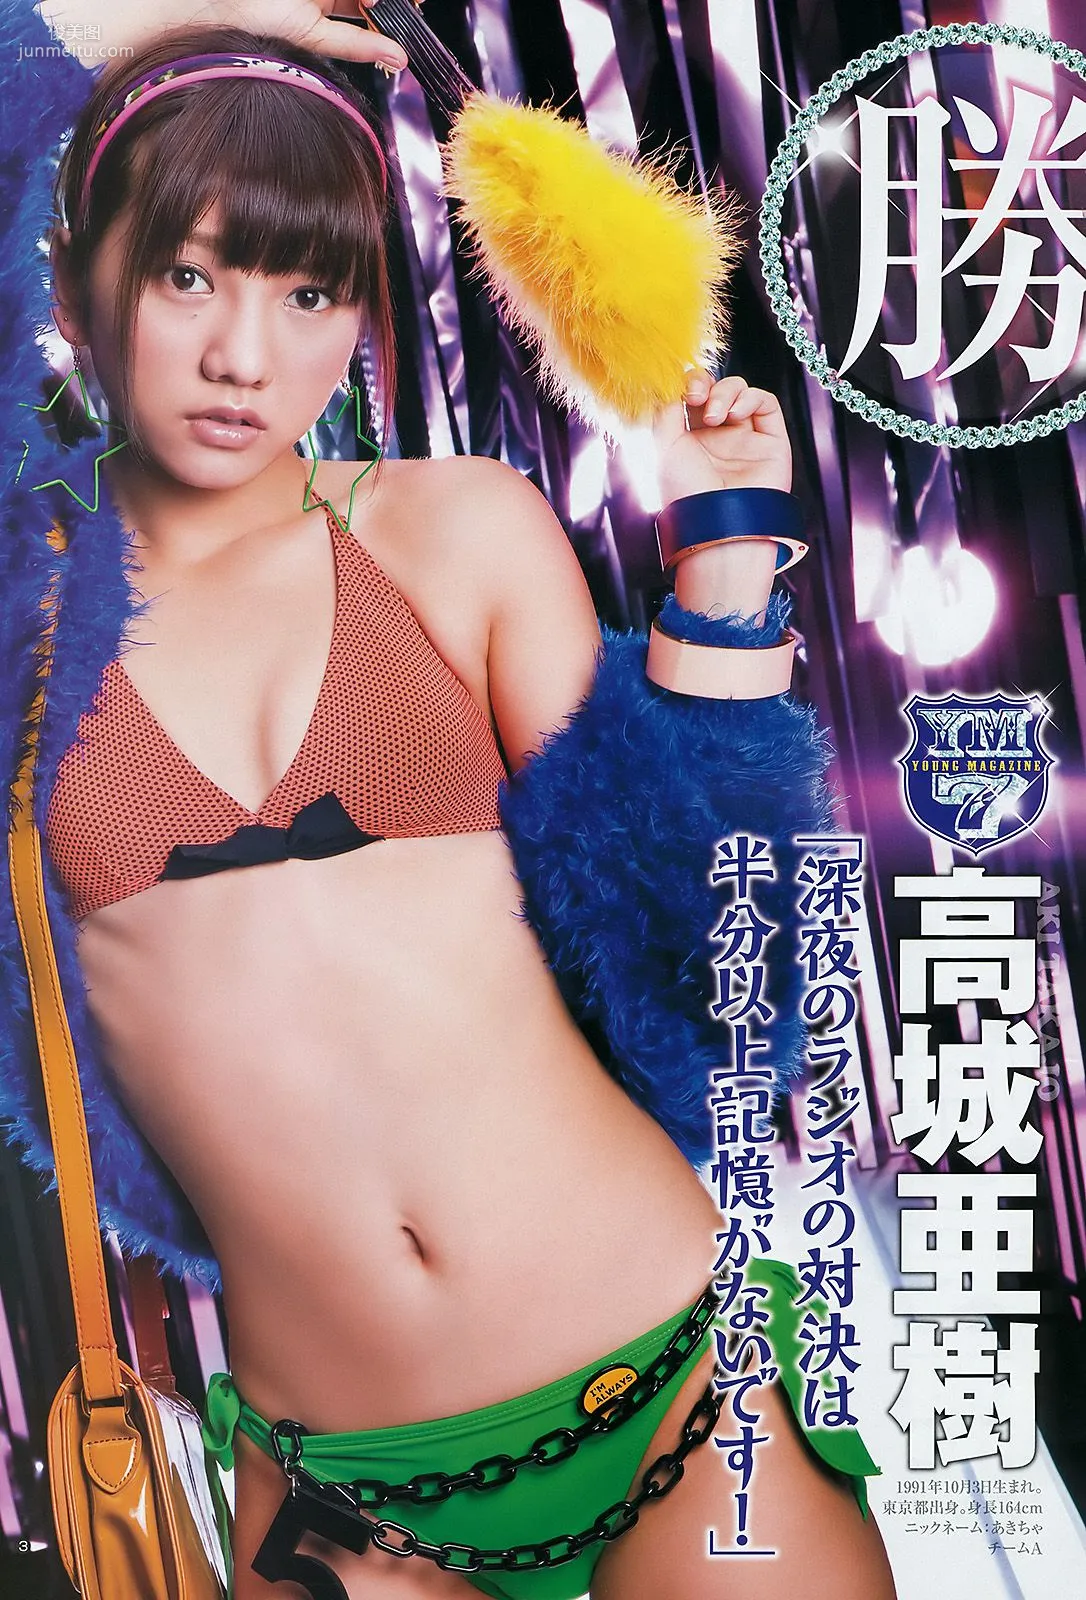 AKB48 YJ7 vs. YM7 神保町・護国寺大戦 FINAL PARTY [Weekly Young Jump] 2012年No.01 写真杂志4